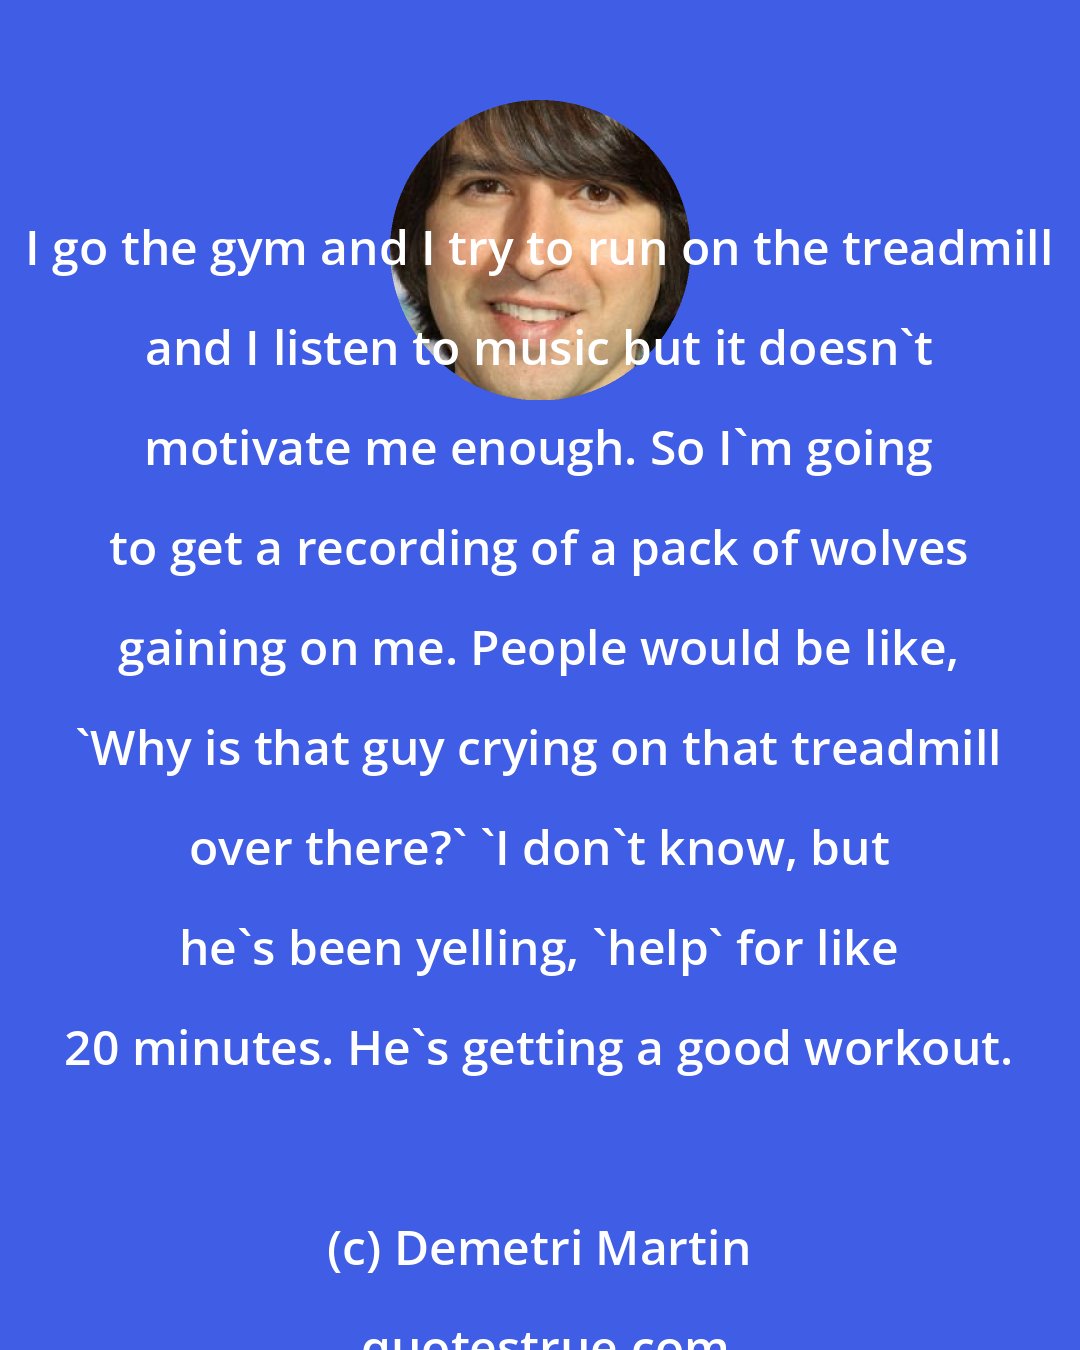 Demetri Martin: I go the gym and I try to run on the treadmill and I listen to music but it doesn't motivate me enough. So I'm going to get a recording of a pack of wolves gaining on me. People would be like, 'Why is that guy crying on that treadmill over there?' 'I don't know, but he's been yelling, 'help' for like 20 minutes. He's getting a good workout.